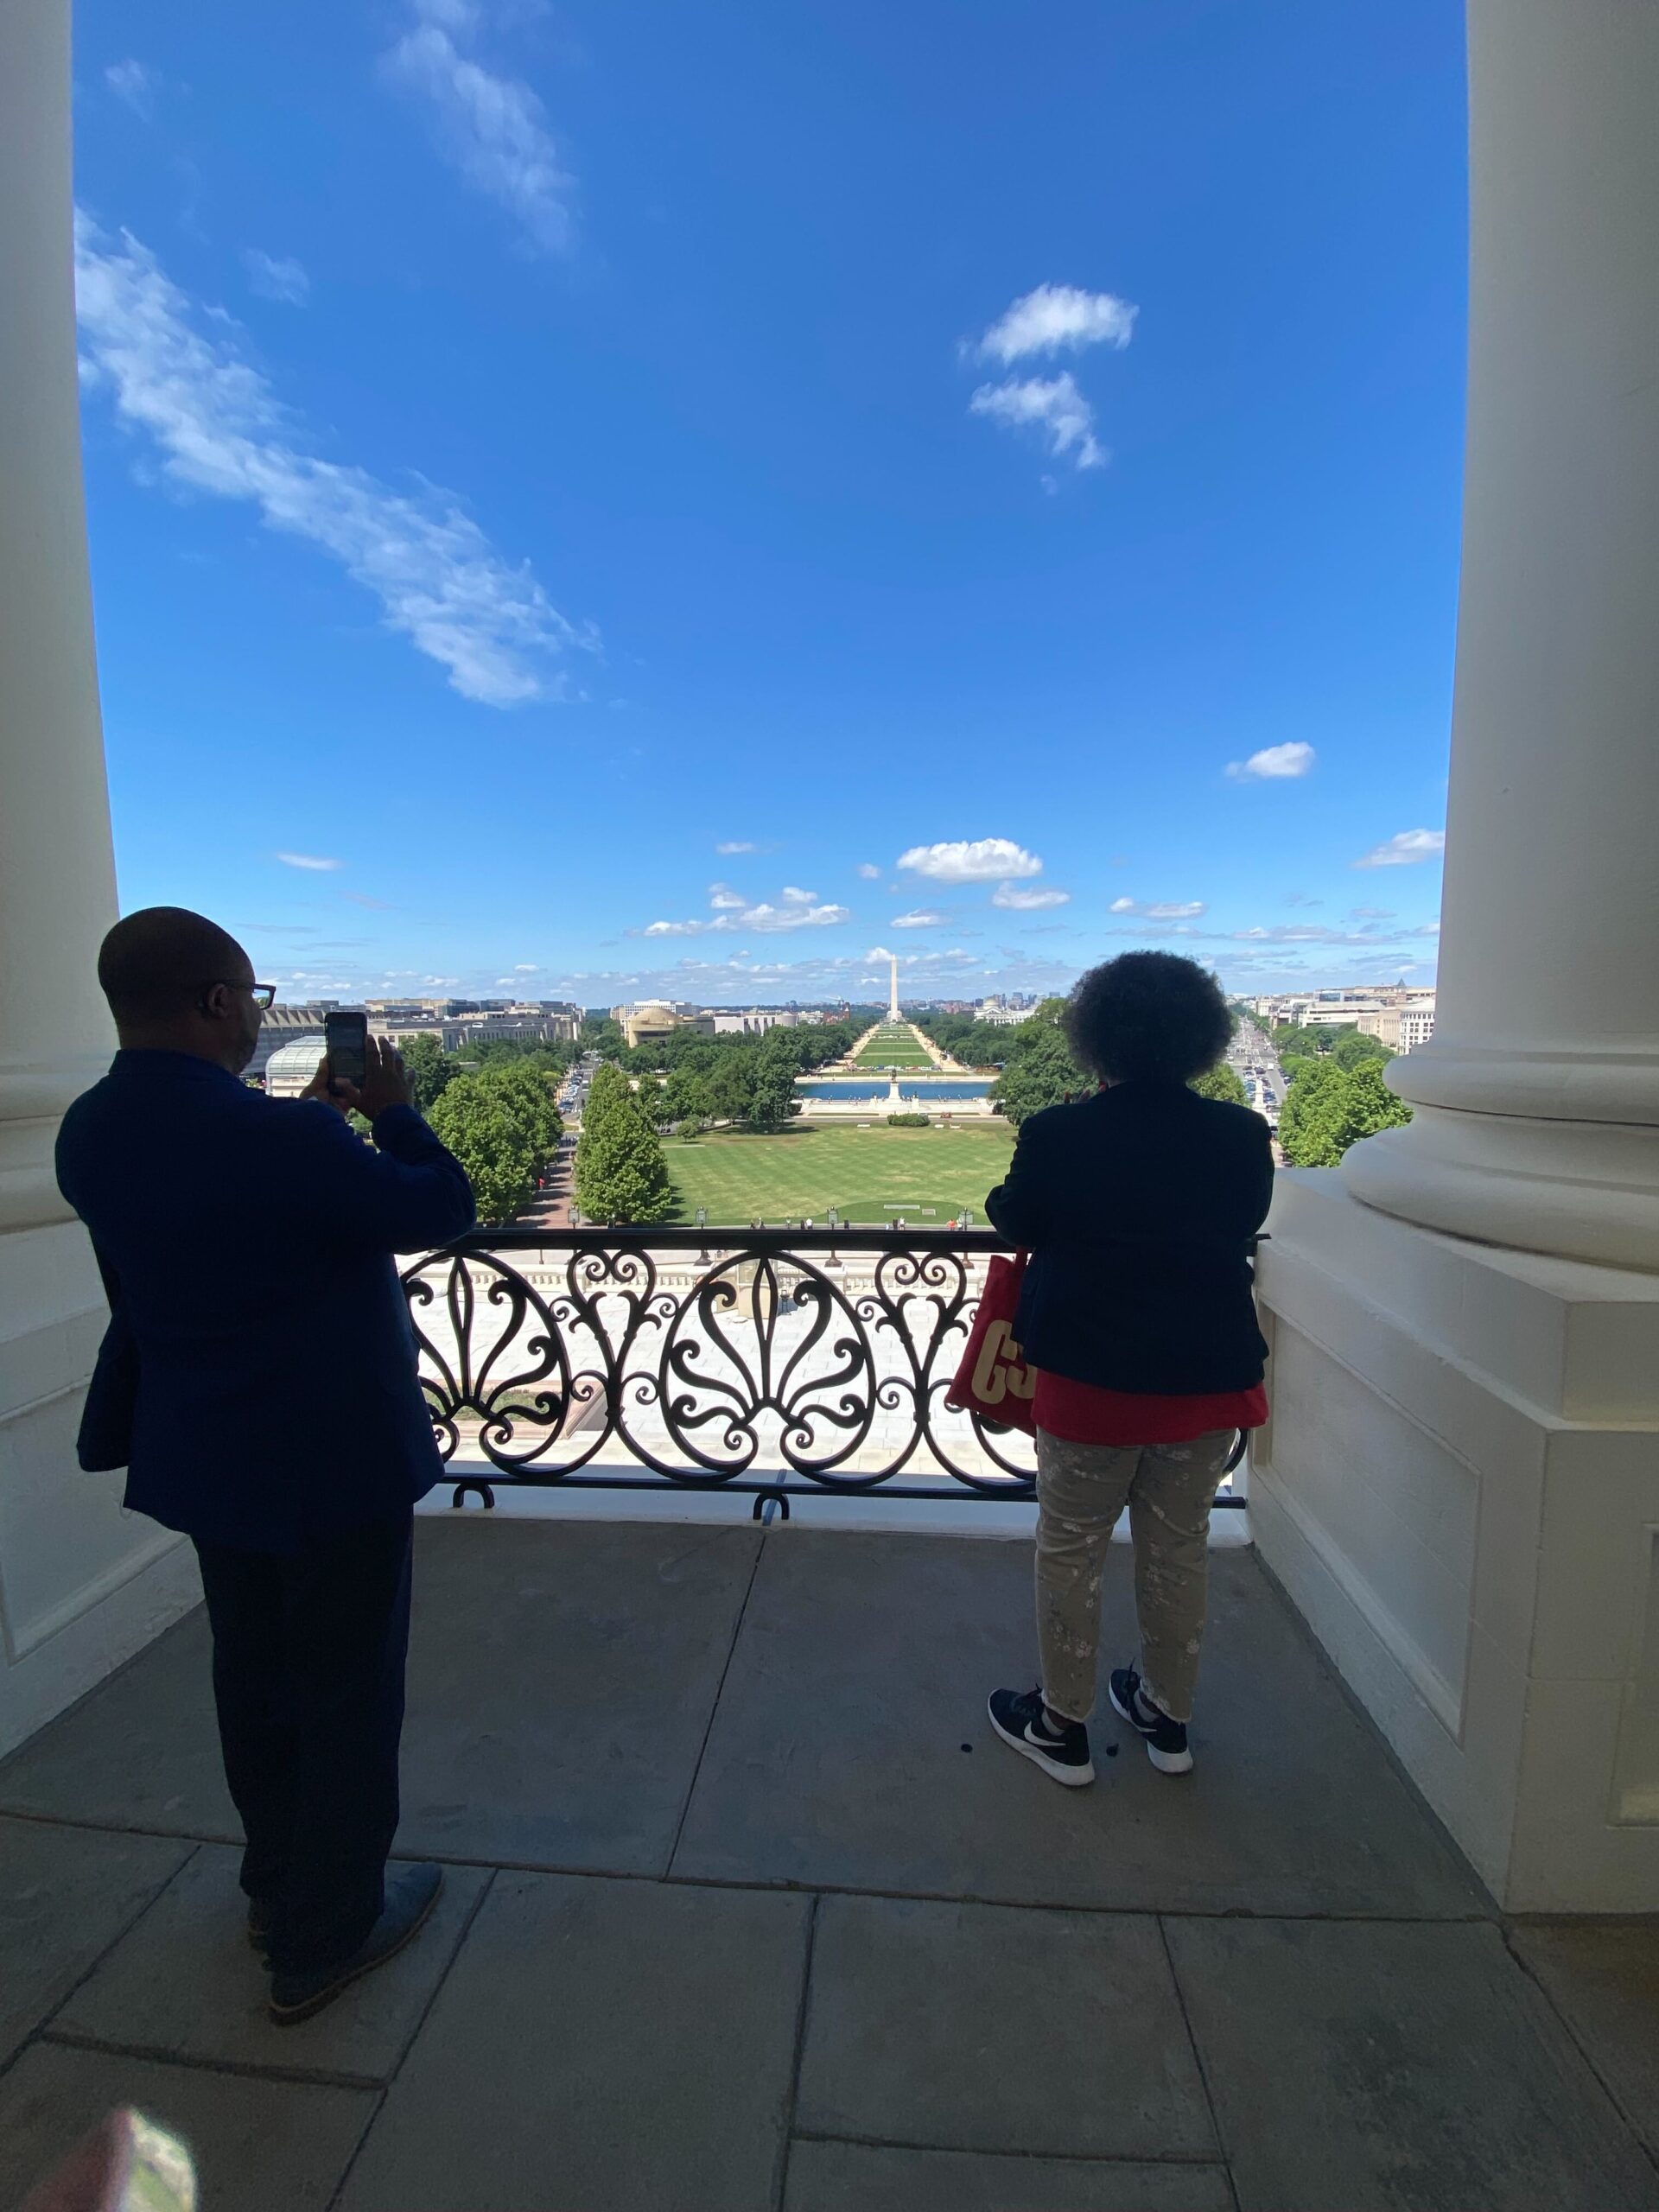 The two volunteers from Louisiana stand on the balcony behind the Speaker's Office. They stare out across the Capitol Steps and toward the National Mall and Washington Monument. On the right of the photo, the male volunteer is taking a picture of the view; on the left, the female volunteer is looking out at the Mall.